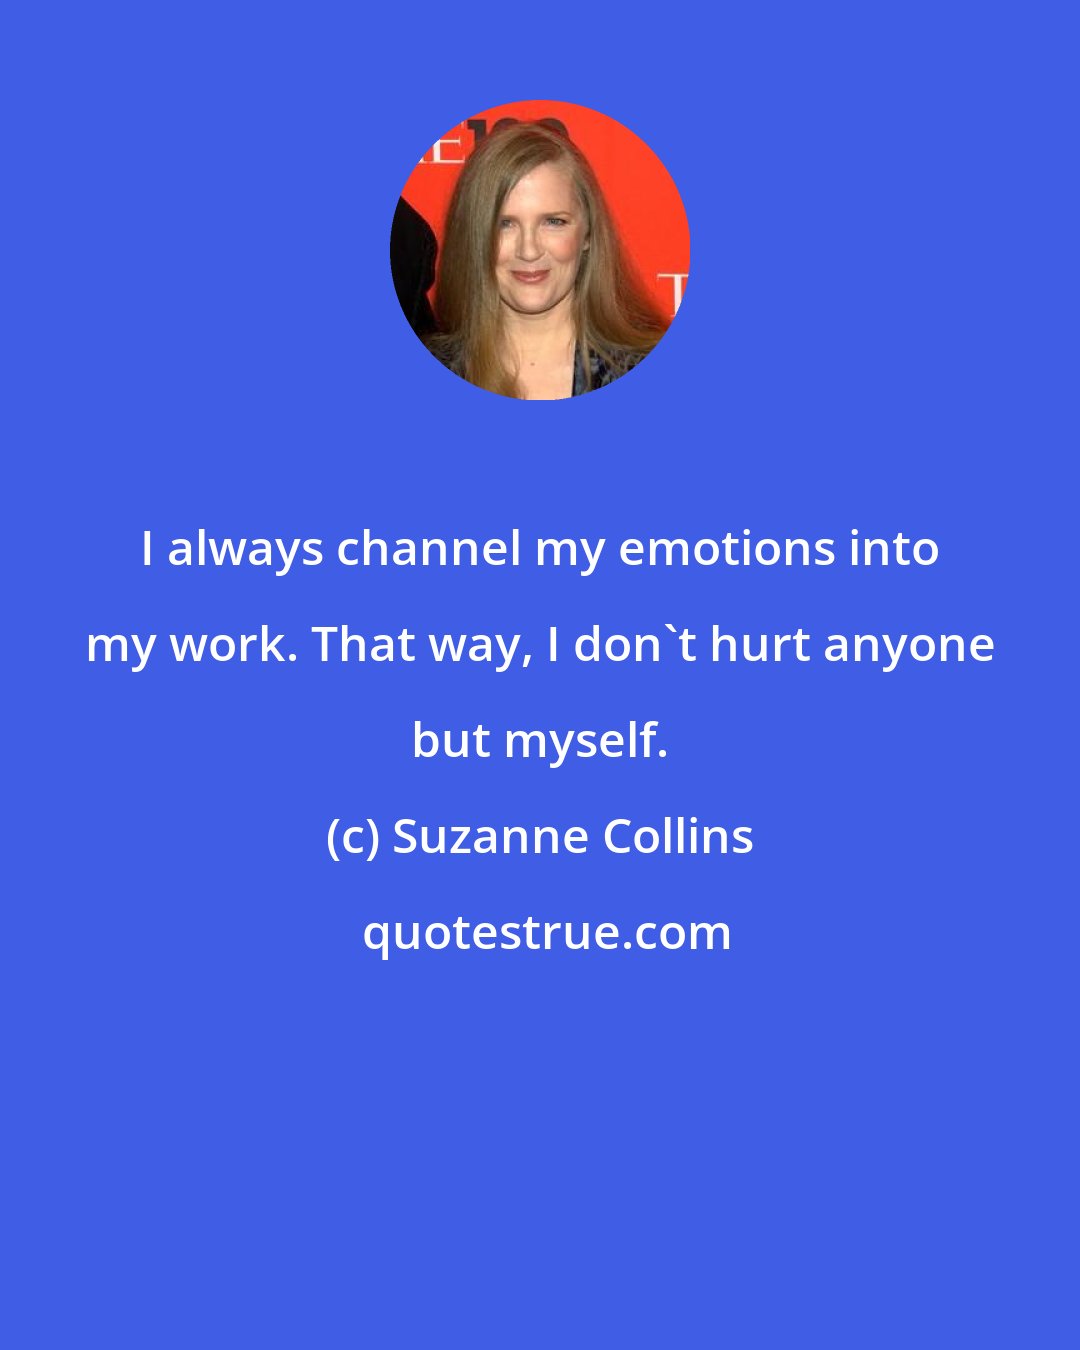 Suzanne Collins: I always channel my emotions into my work. That way, I don't hurt anyone but myself.